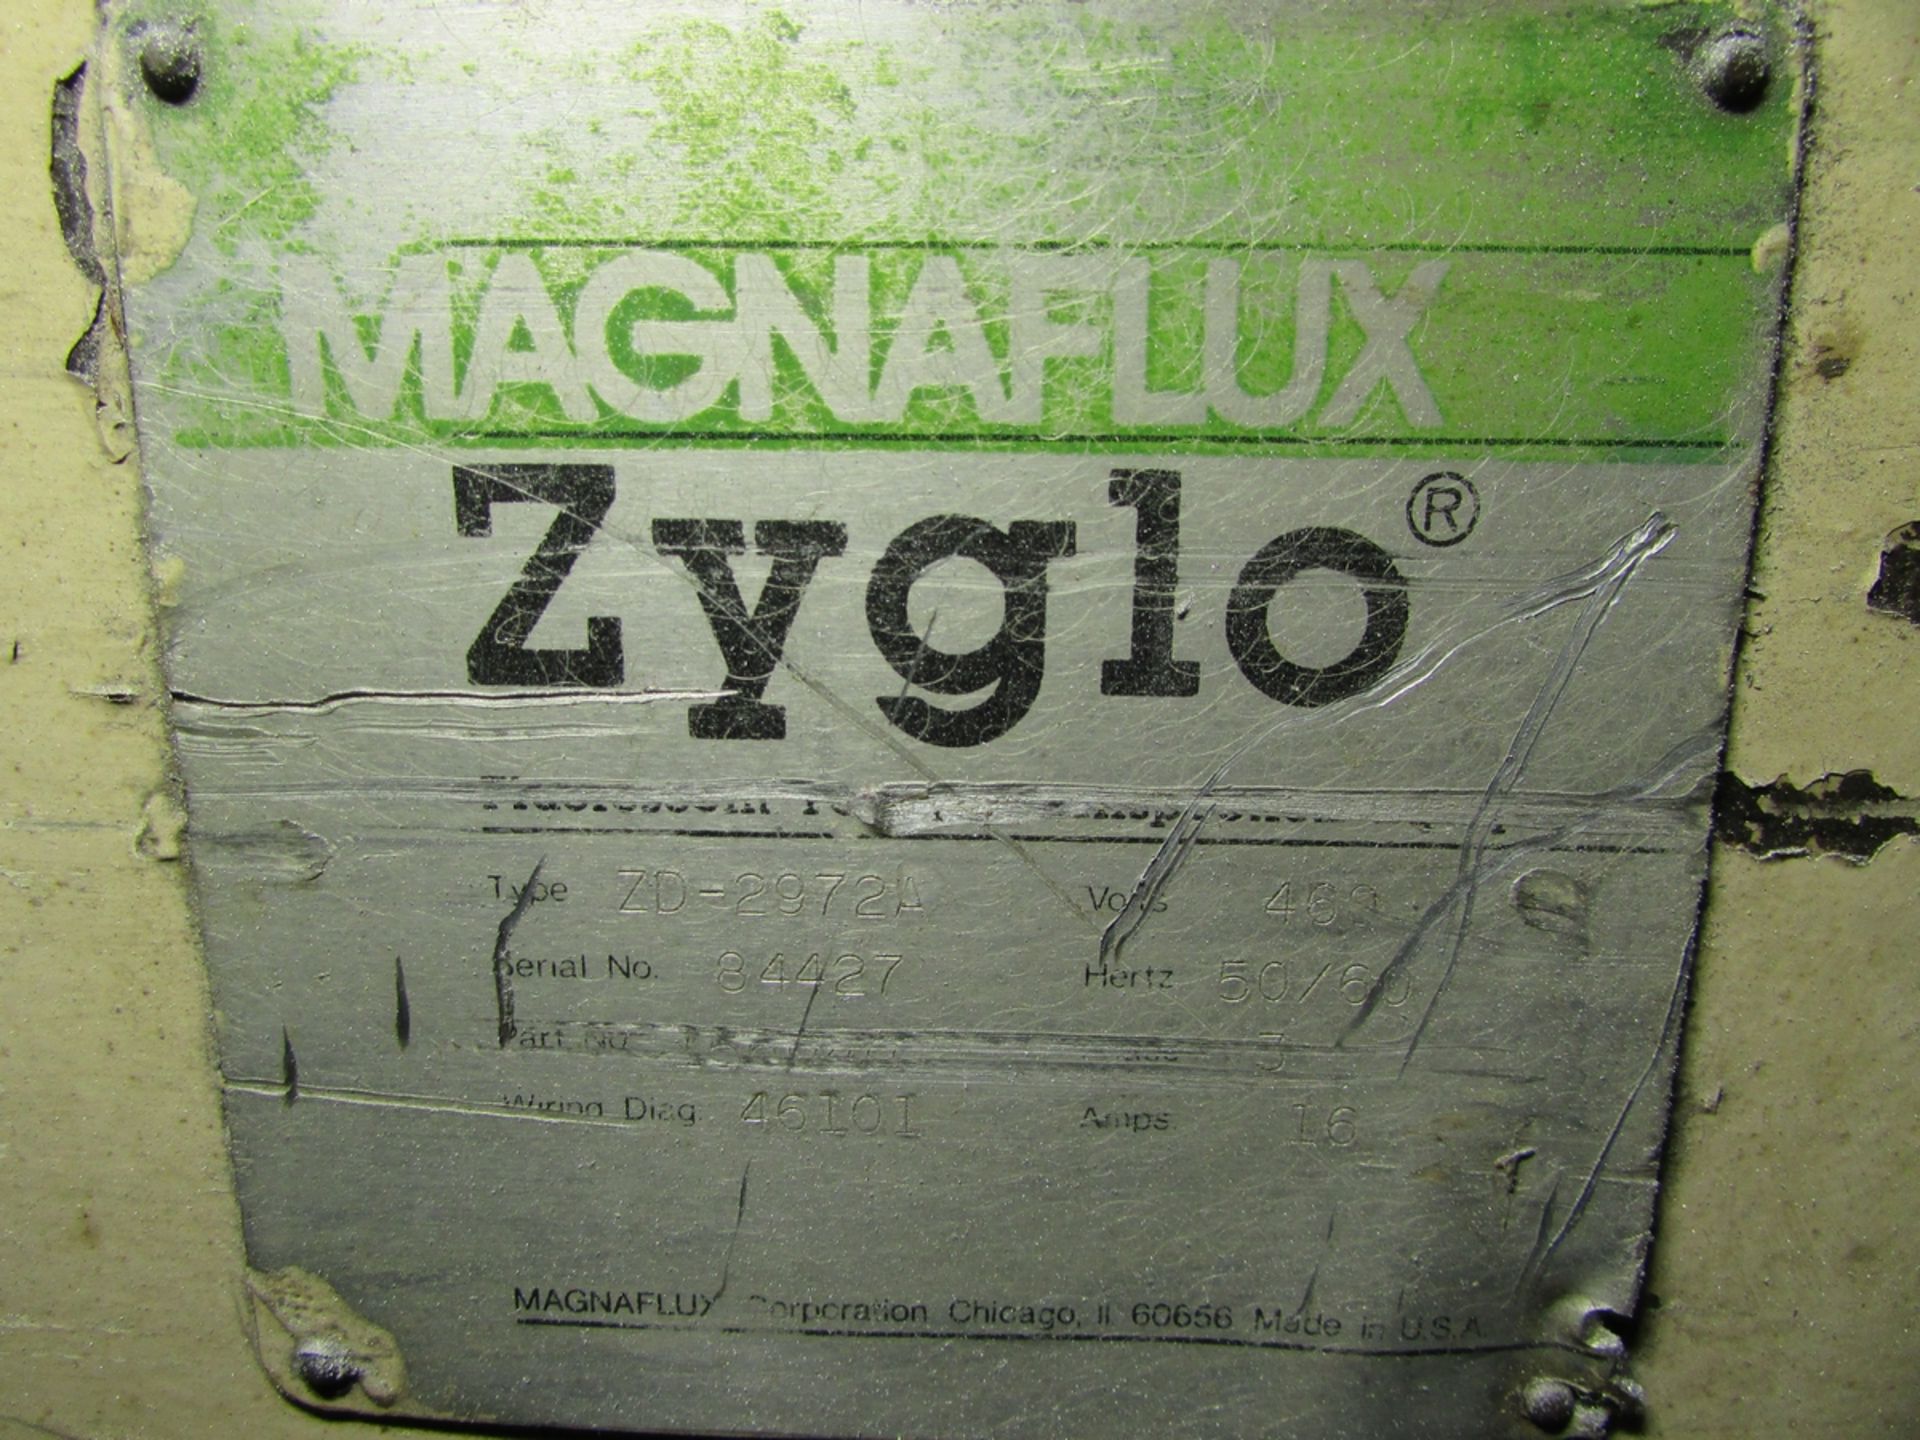 MAGNAFLUX ELECTRIC OVEN, MODEL ZYGLO ZD-2972A, 30" X 70" X 24" CHAMBER, HONEYWELL CHART RECORDER, W/ - Image 10 of 10